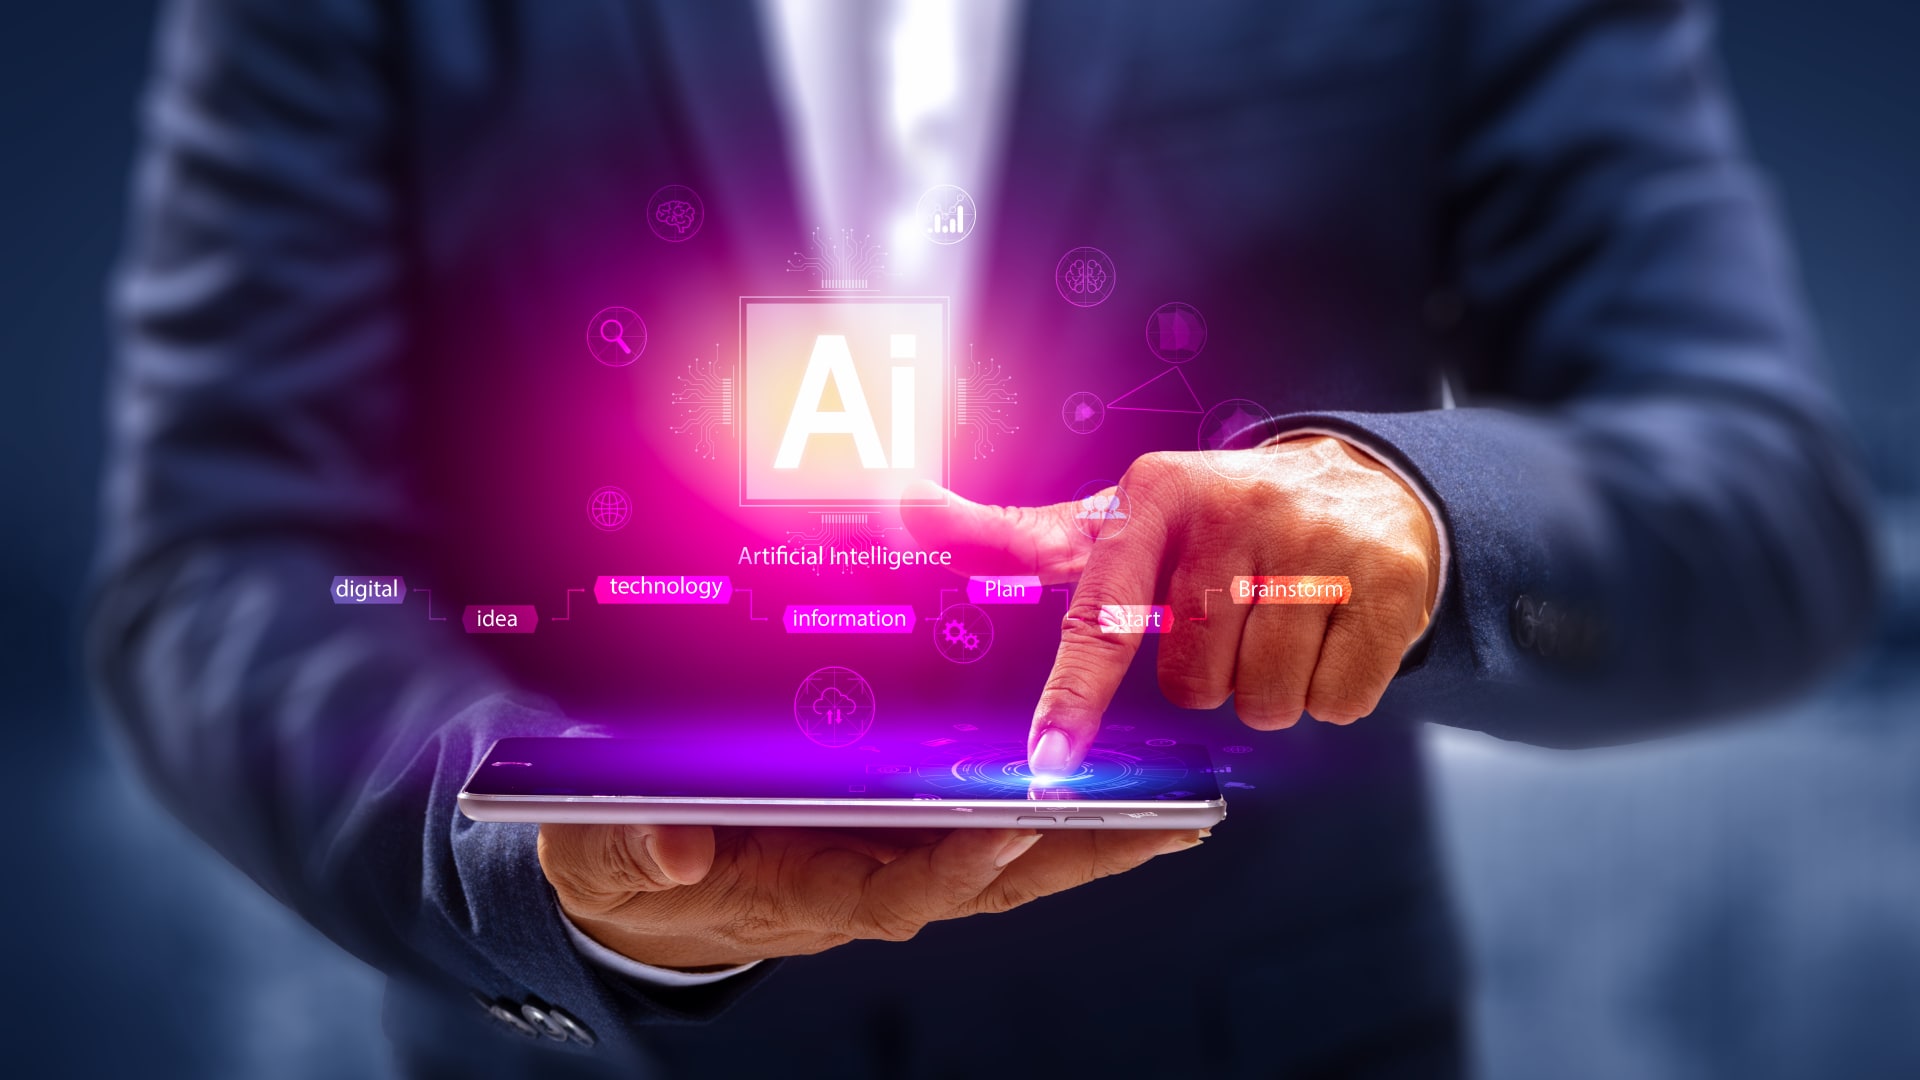 World's first major act to regulate AI passed by the European parliament